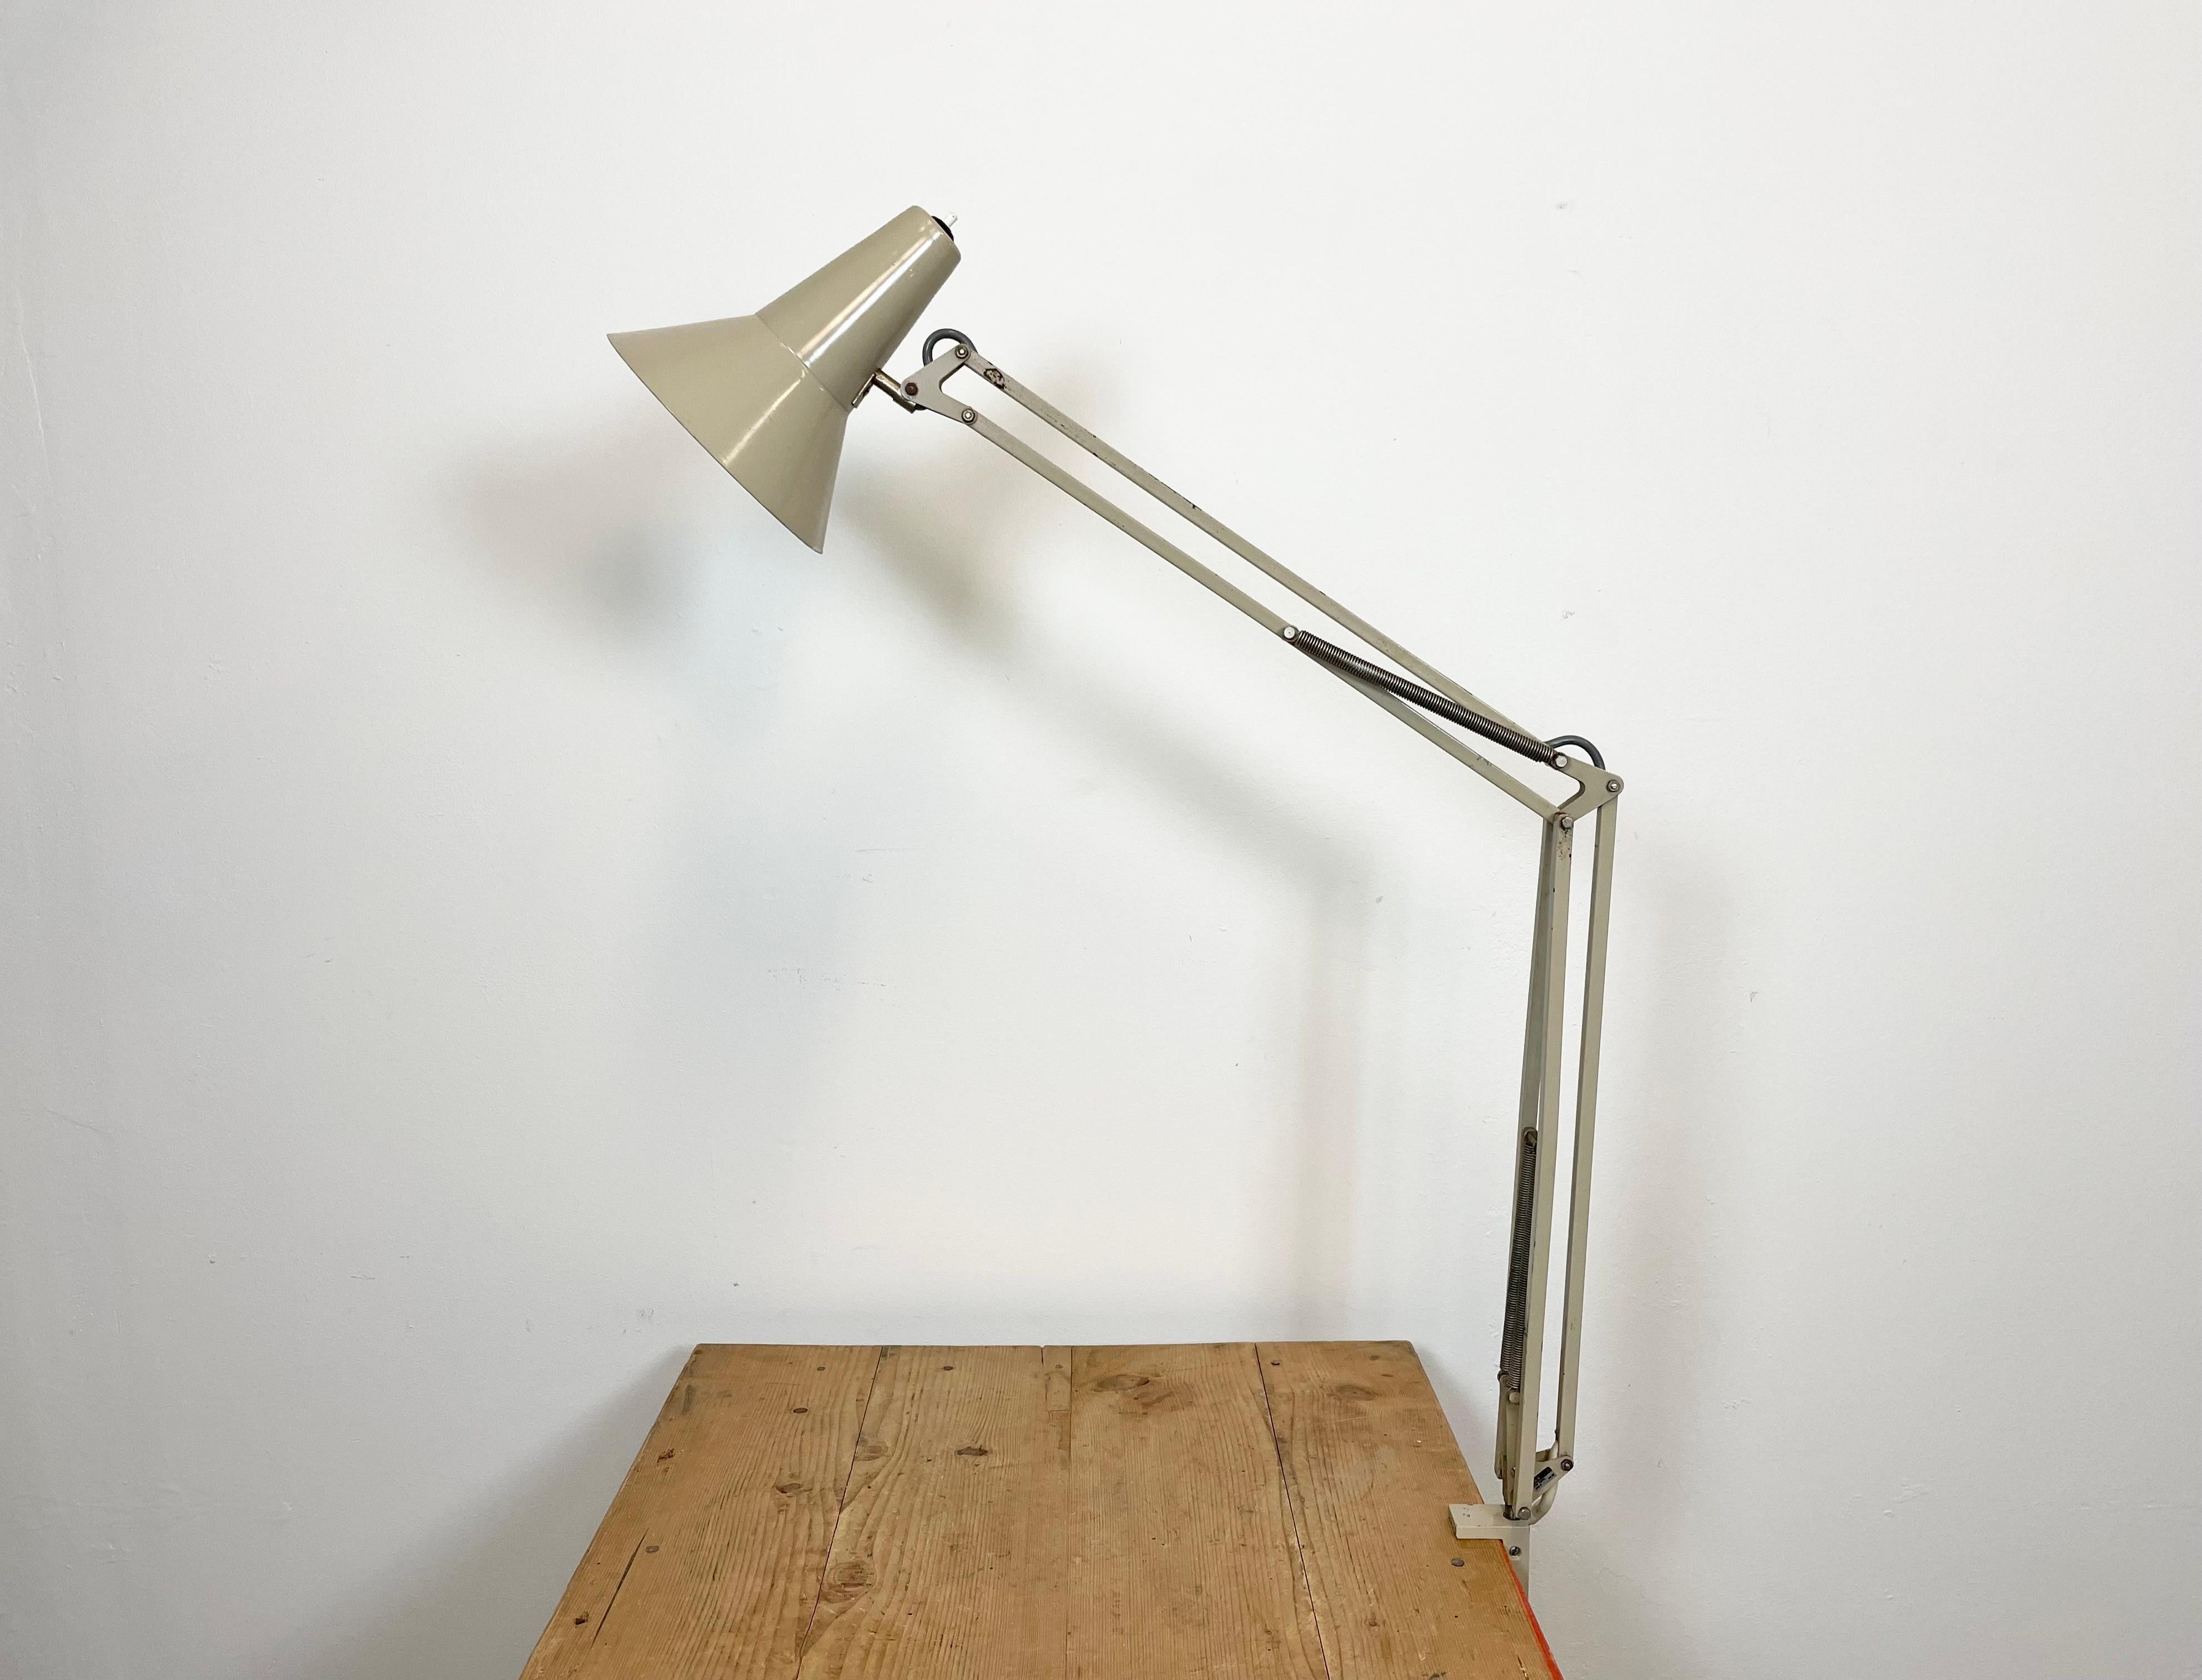 Vintage beige adjustable table lamp made by FAX in former Czechoslovakia during the 1970. It features an aluminium shade with original switch, an iron arm and clamp base.The socket requires standard E 27/ E 26 light bulbs. Original vintage condition.